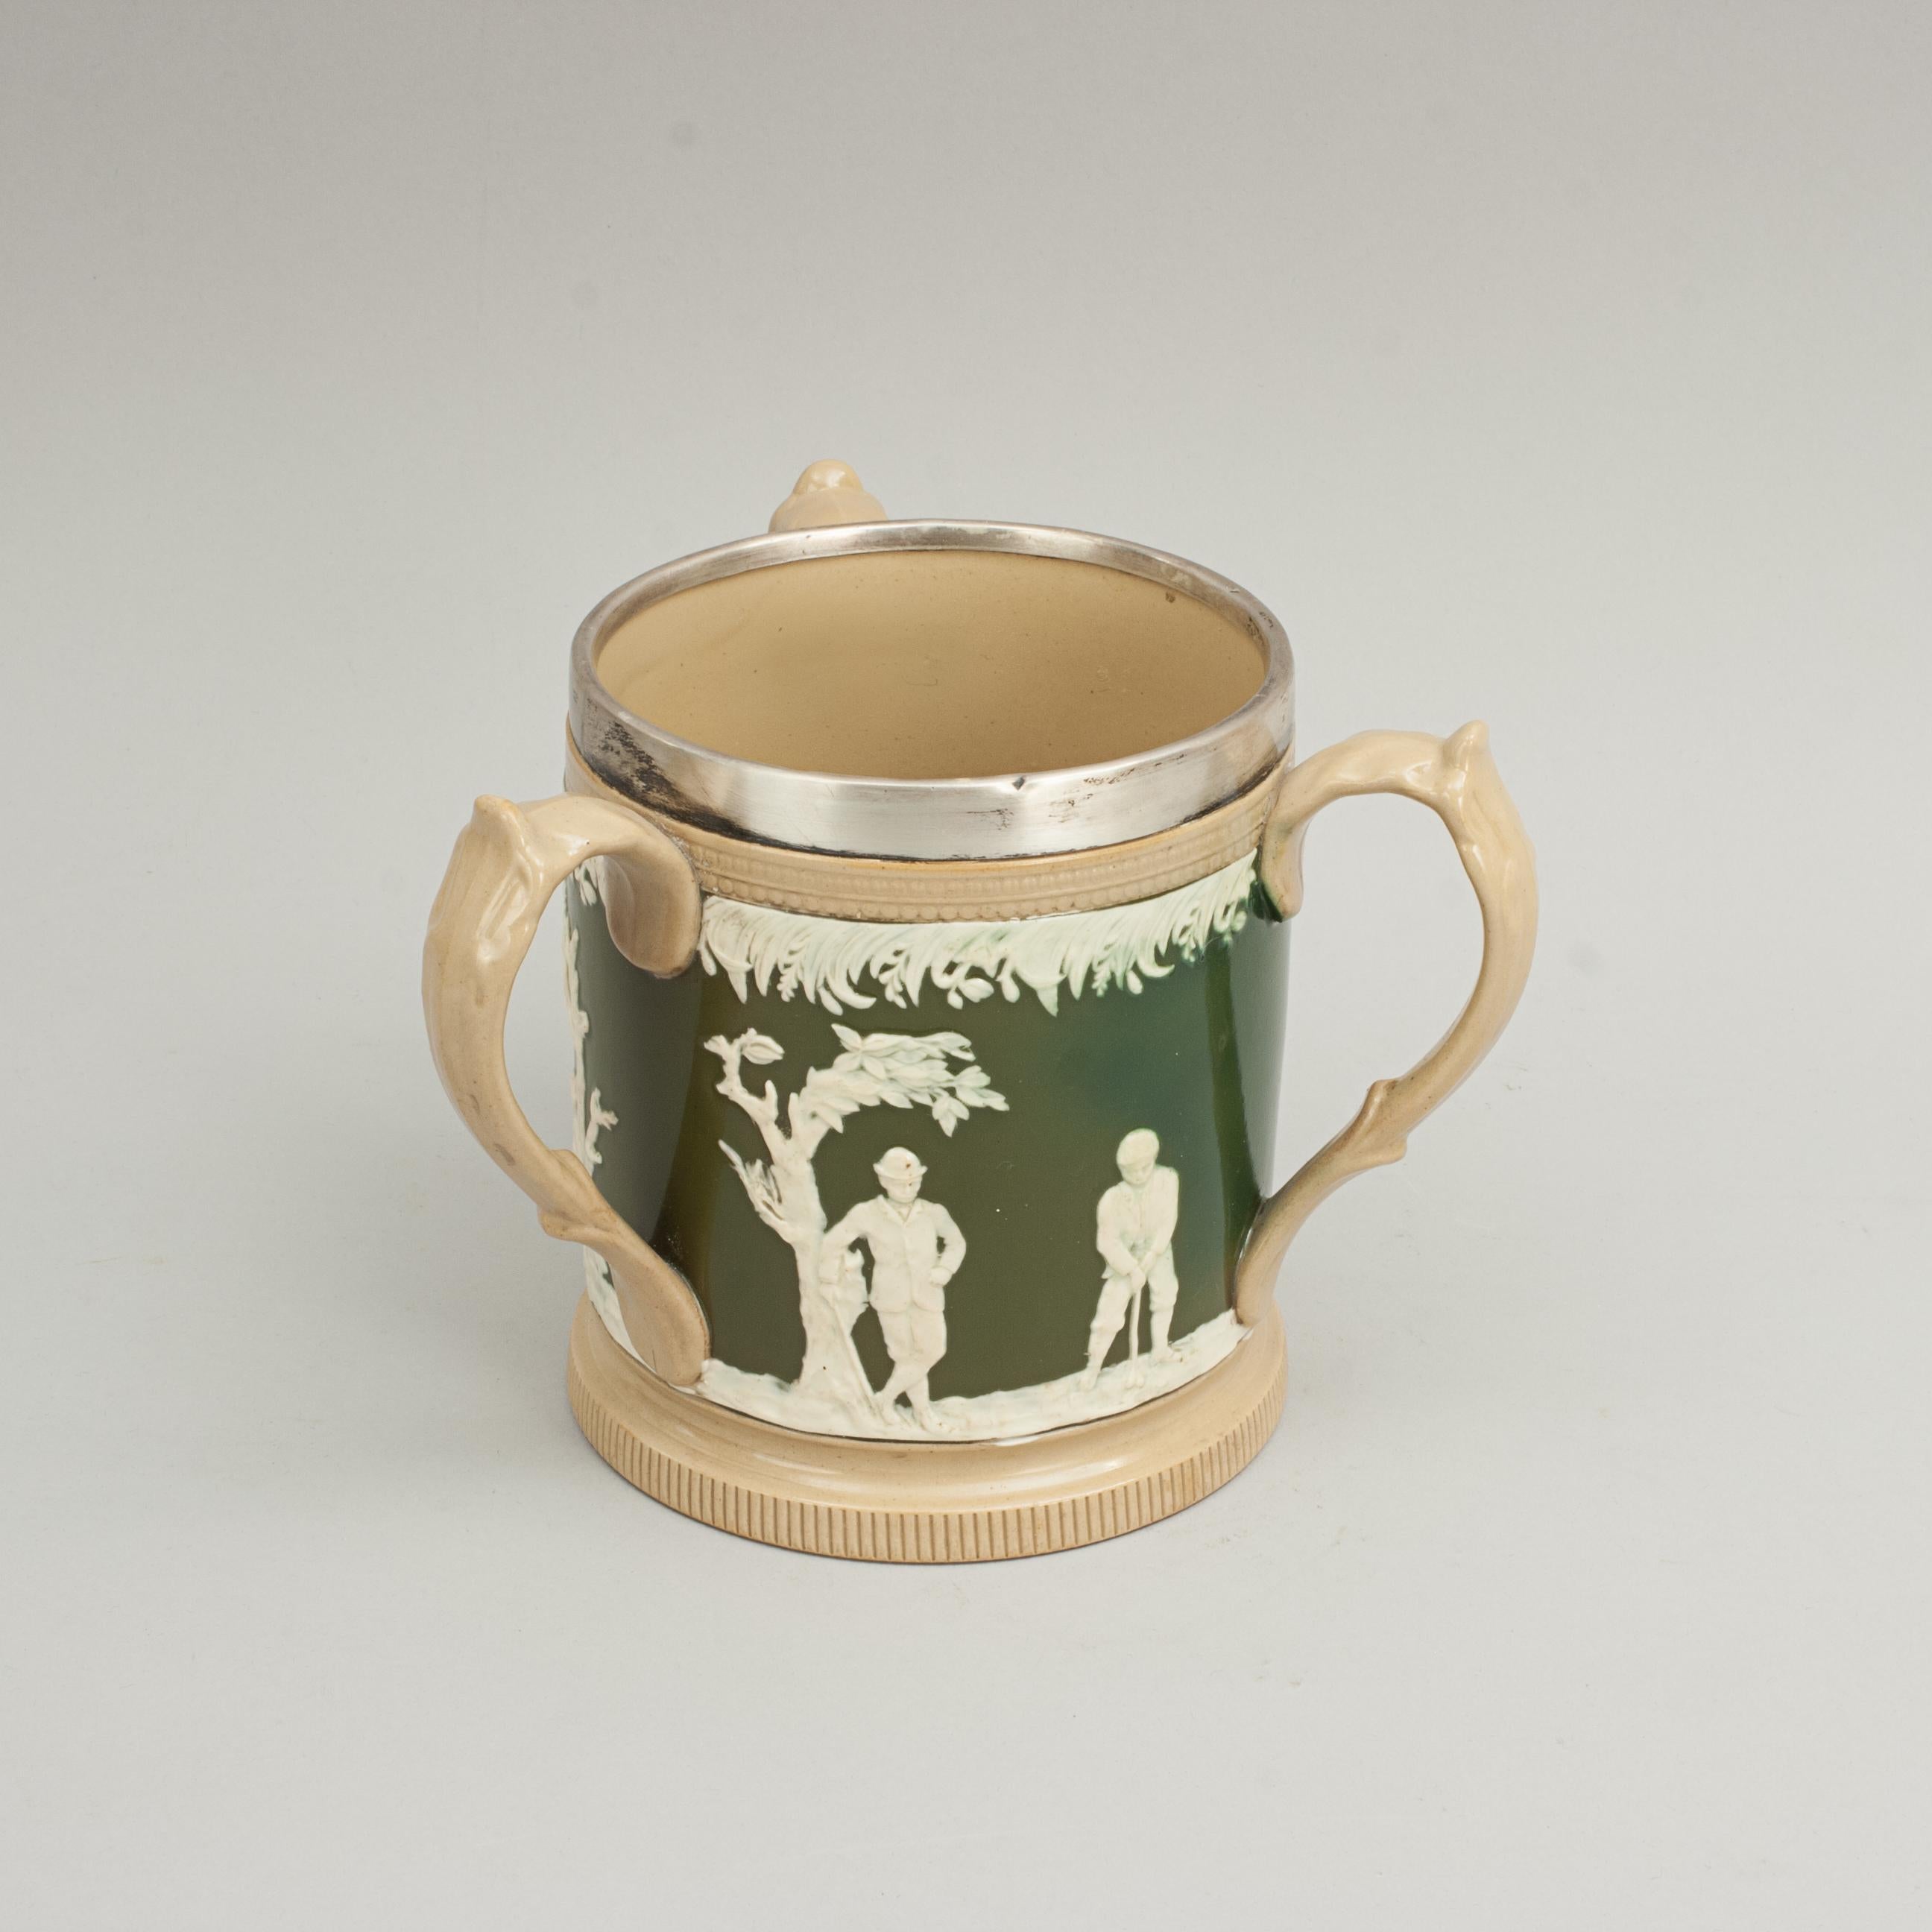 Three handled golf loving cup, Tankard.
A fine Copeland Spode tyg with silver rim, three handles and three golf scenes. This wonderful golf tankard decorated with golfers in white relief on olive green and beige background, the silver rim